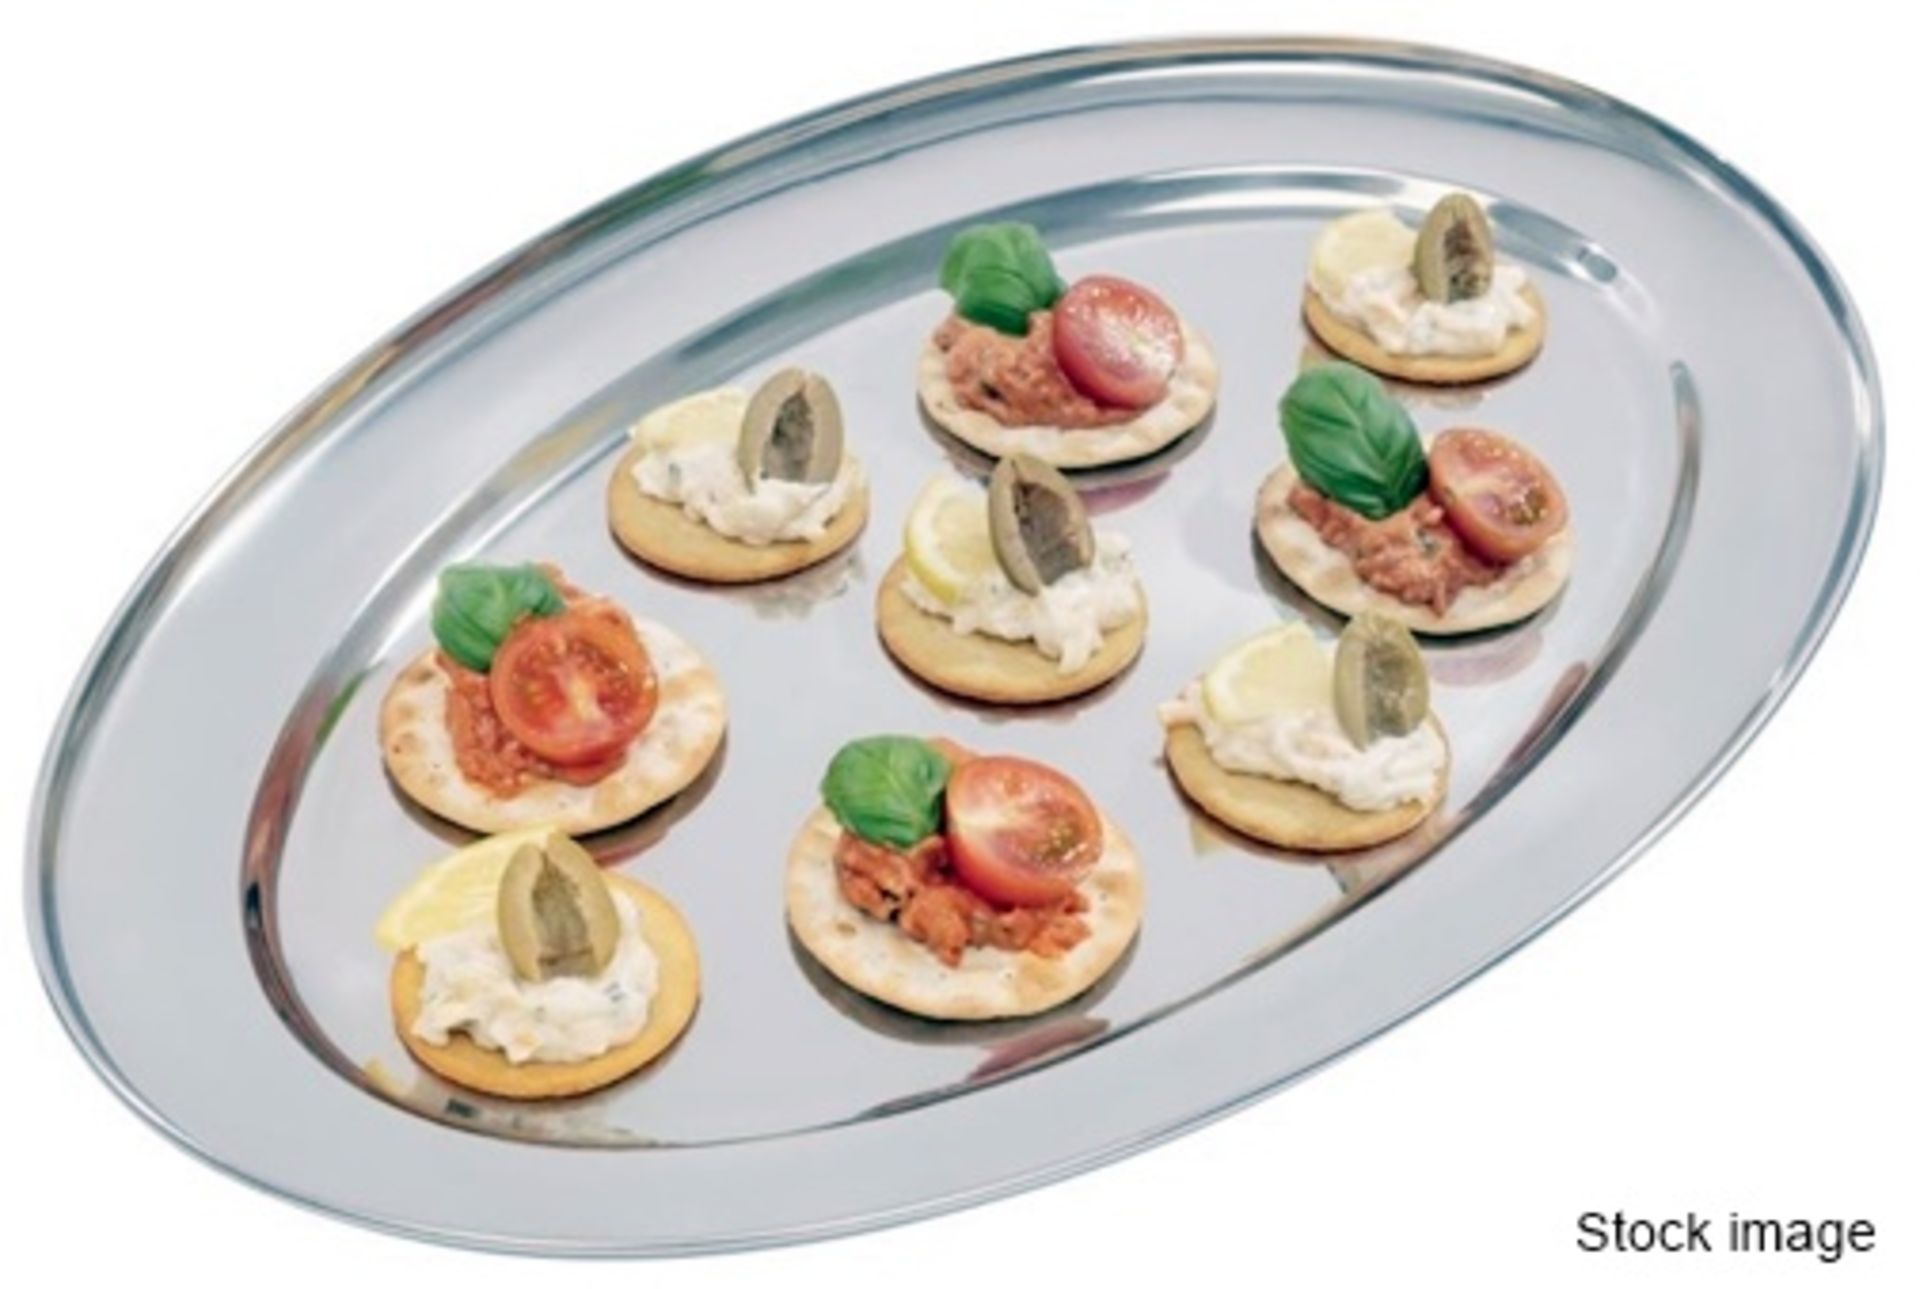 50 x Stainless Steel Oval Restaurant Serving Tray Platters - Dimensions (approx): 45 x 29cm -